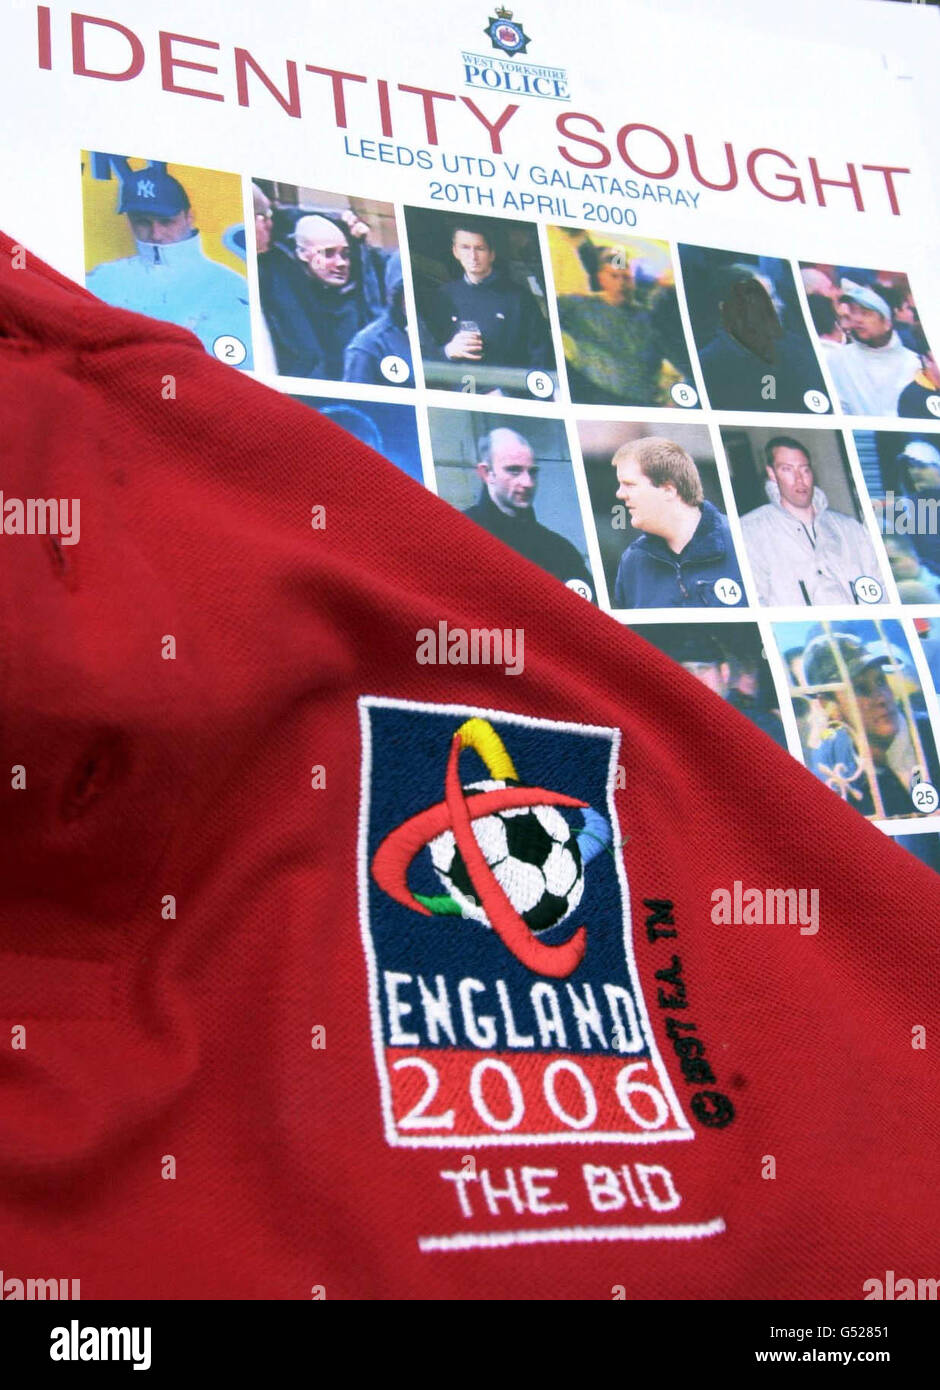 The England bid for the 2006 World Cup in Football was rejected, on the same day that West Yorkshire Police released a poster of men they would like to identify after trouble at the Leeds United v Galatasaray match UEFA Cup match at Elland Road in April 2000. * Members of England's bidding team today blamed football violence for damaging their chances. Stock Photo